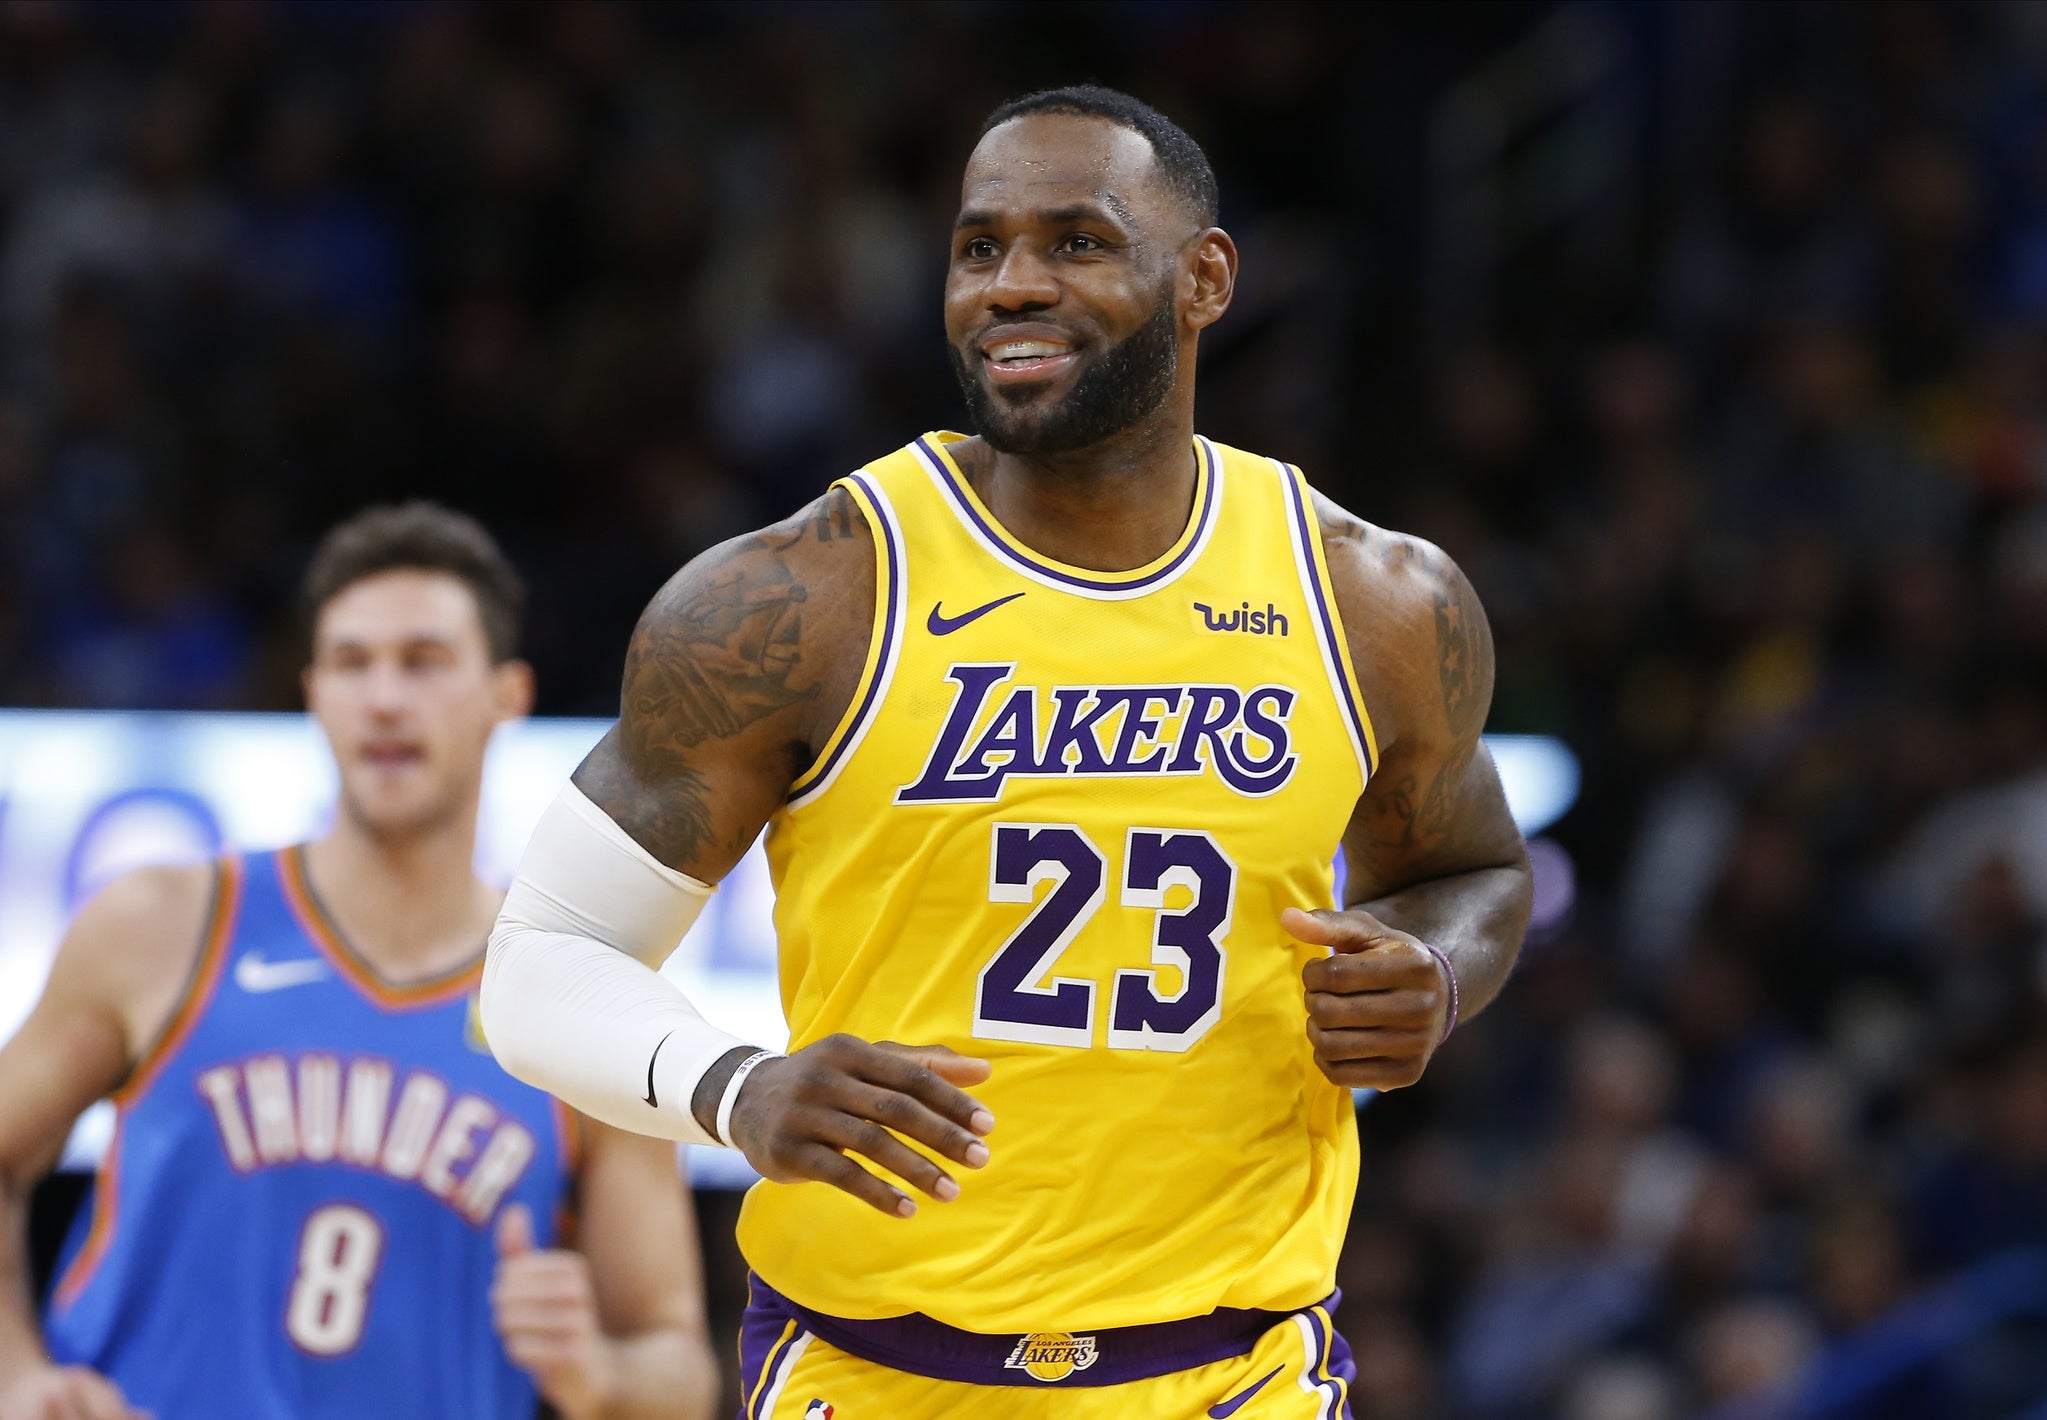 Lakers Highlights LeBron James Impresses To Begin FourGame Road Trip